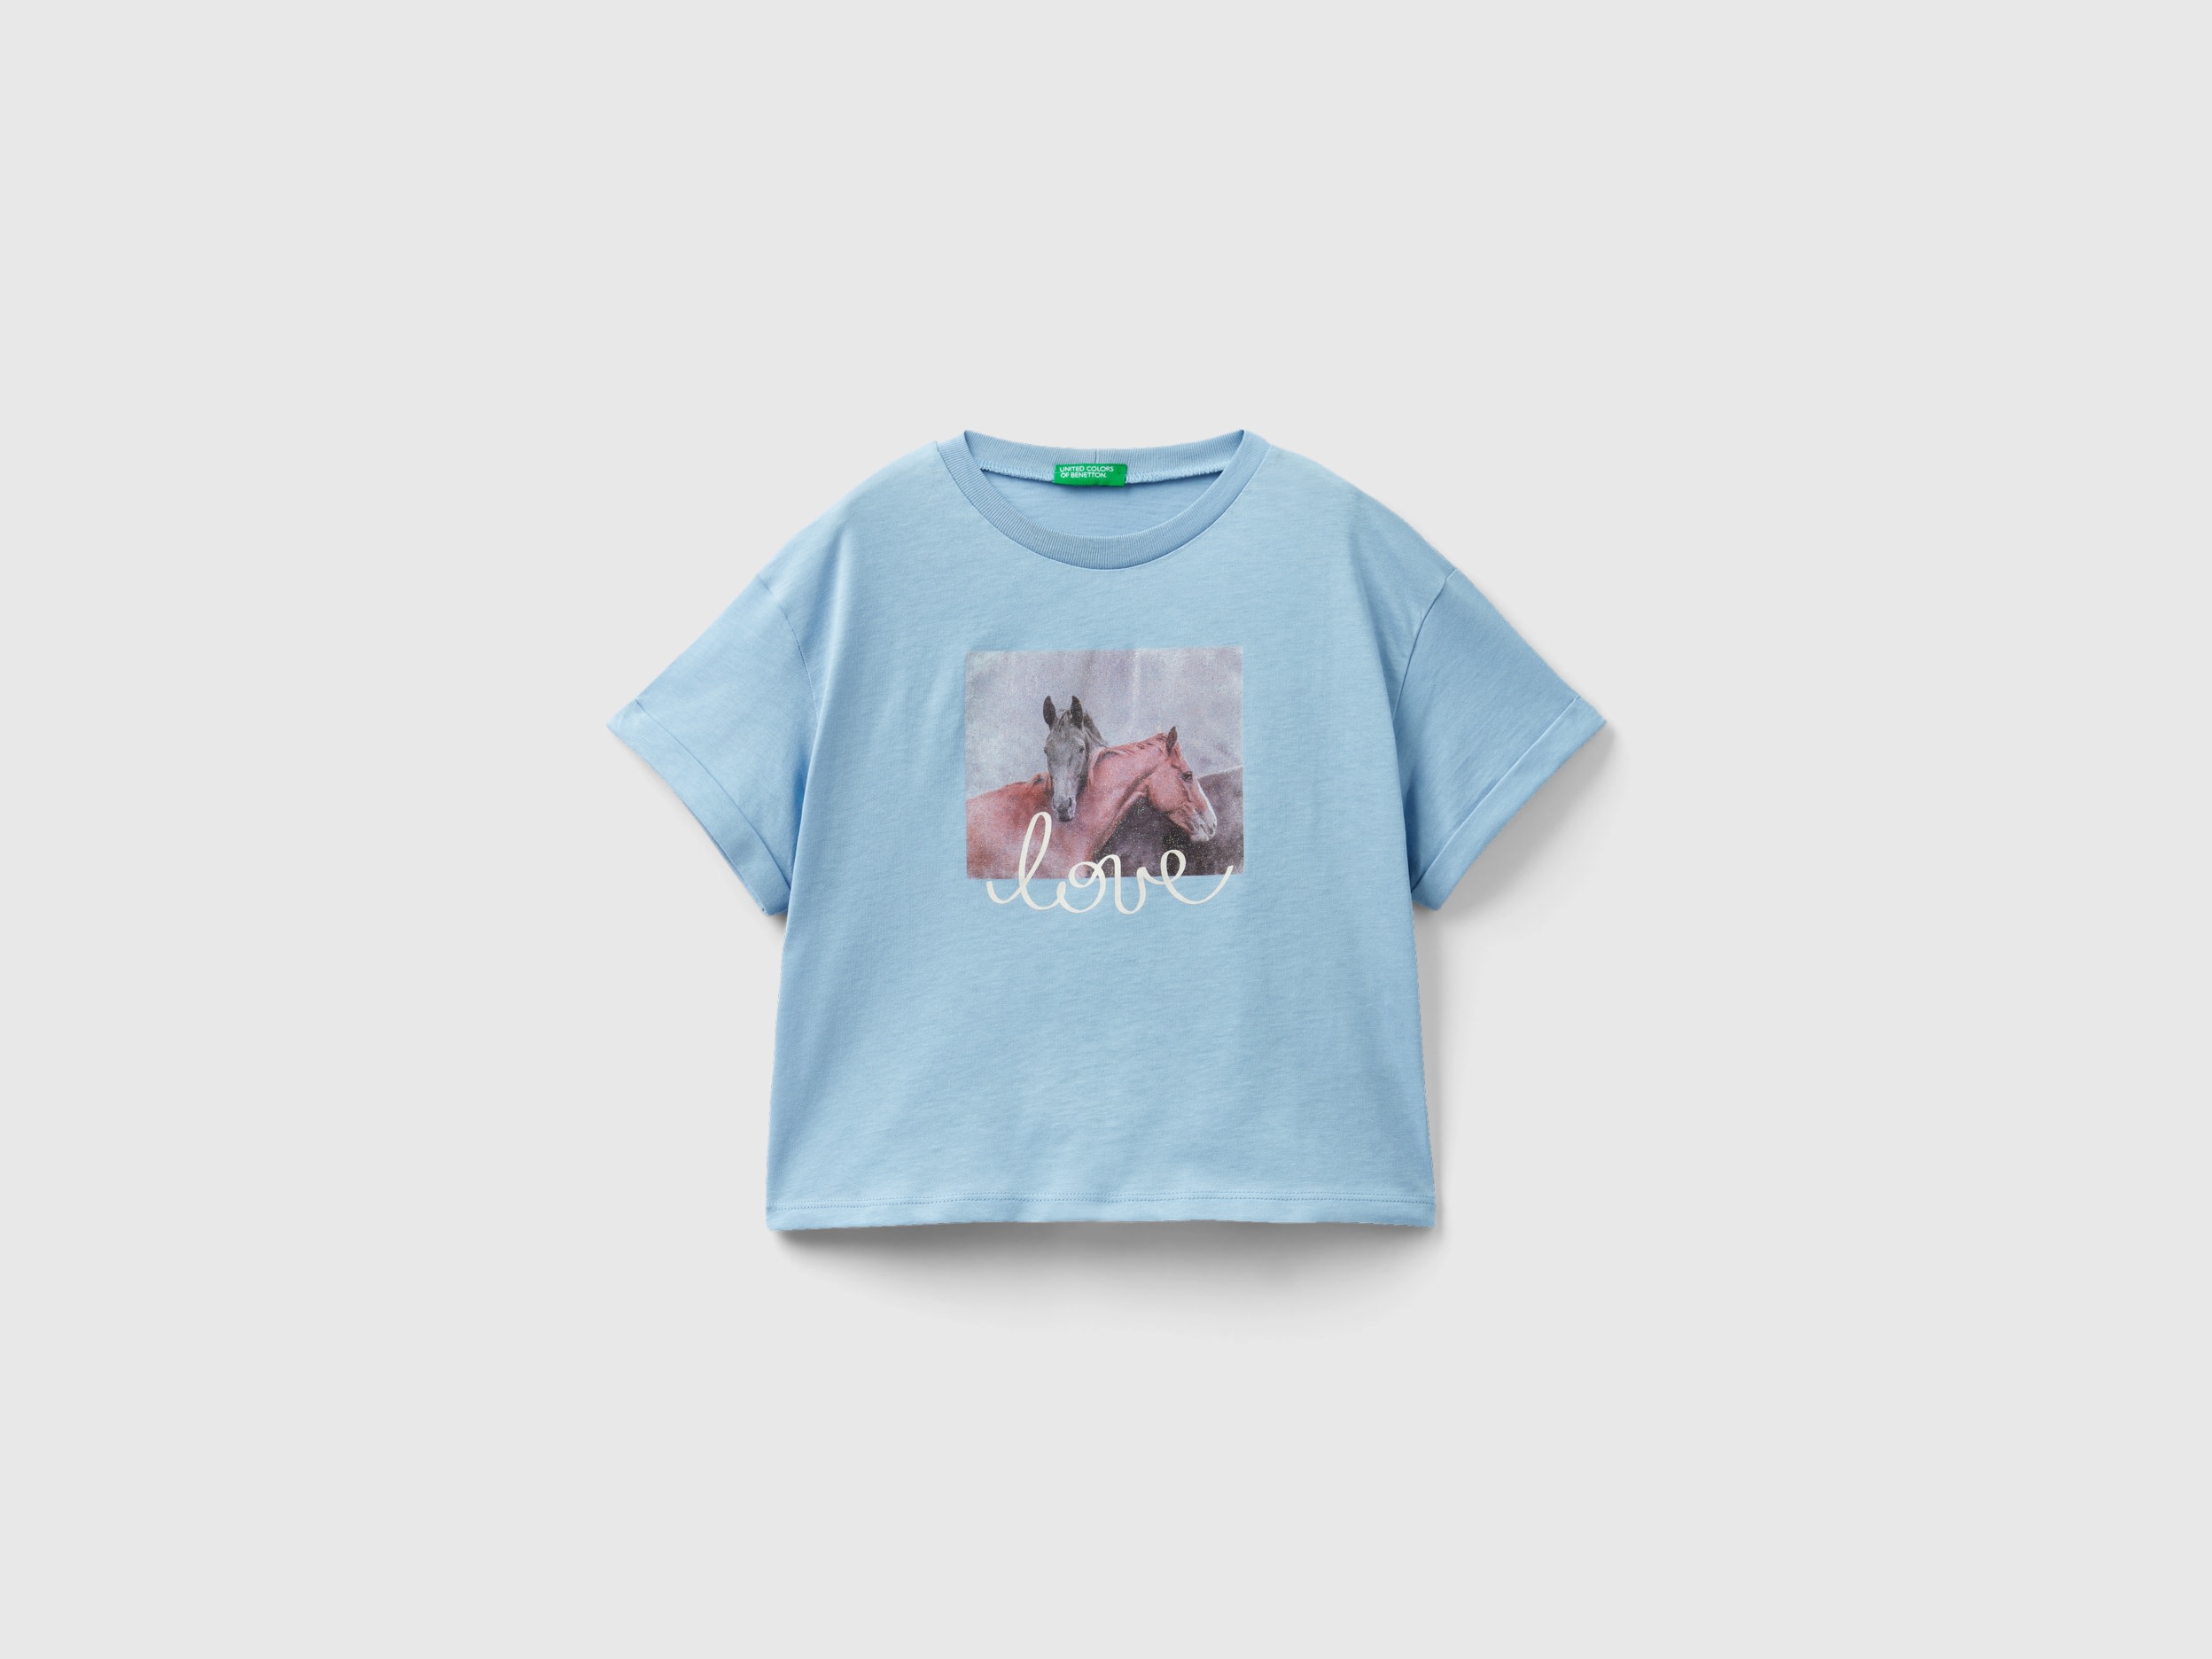 Image of Benetton, T-shirt With Photographic Horse Print, size 2XL, Sky Blue, Kids